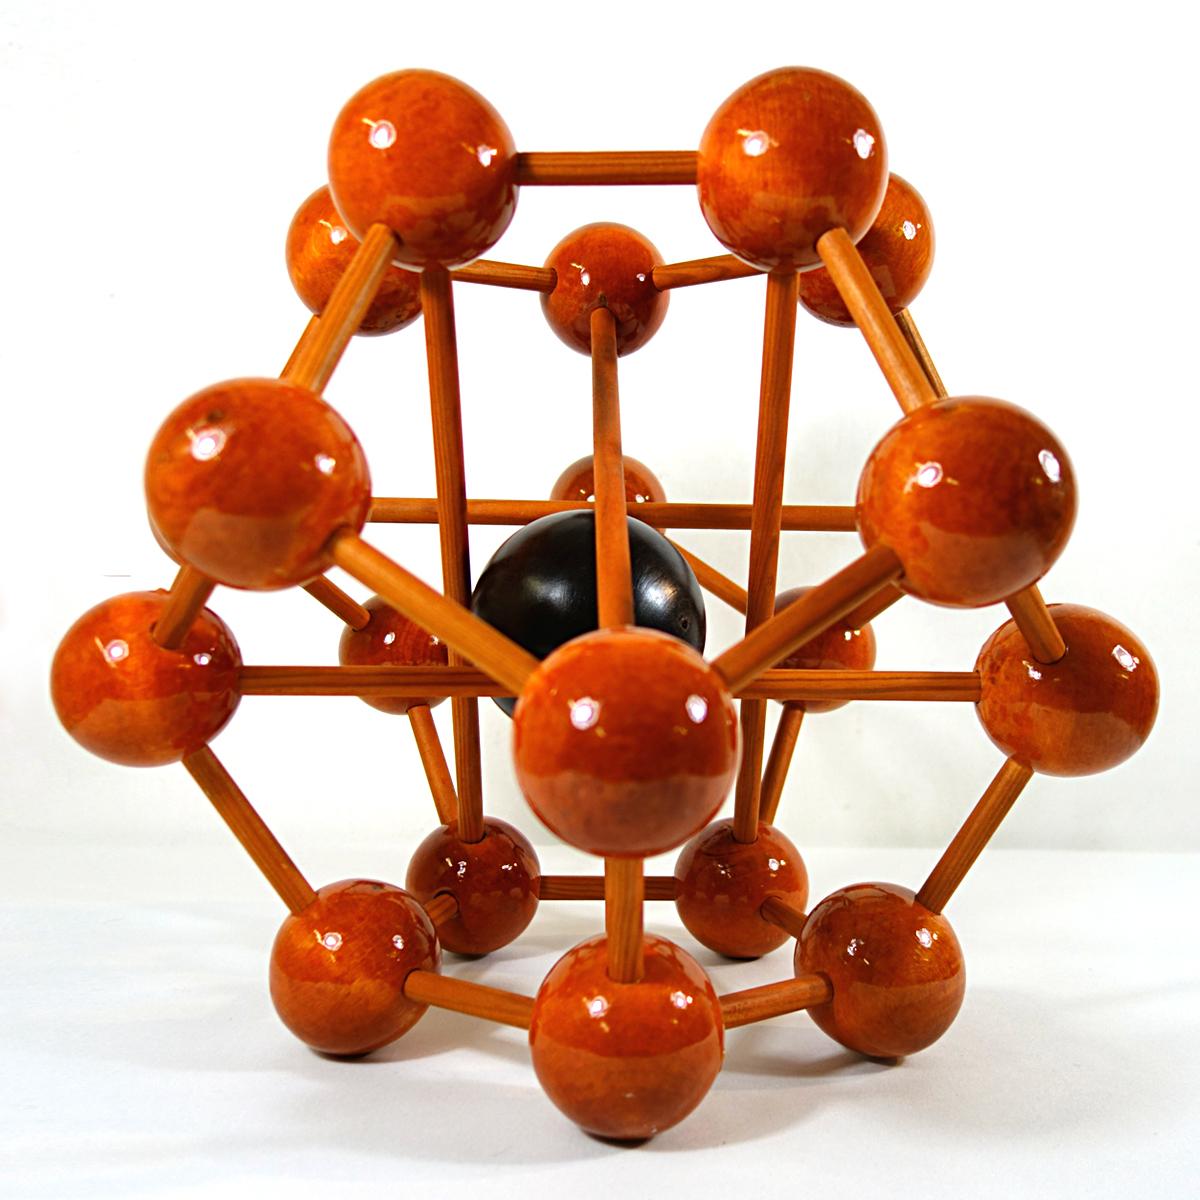 This large miniature version of an atom contains 20 balls on 4 levels, so 5 balls per level. They are intertwined by woorden sticks. In the heart of the atom sits a bigger moving ball made of a darker kind of wood.
This midcentury atom comes from